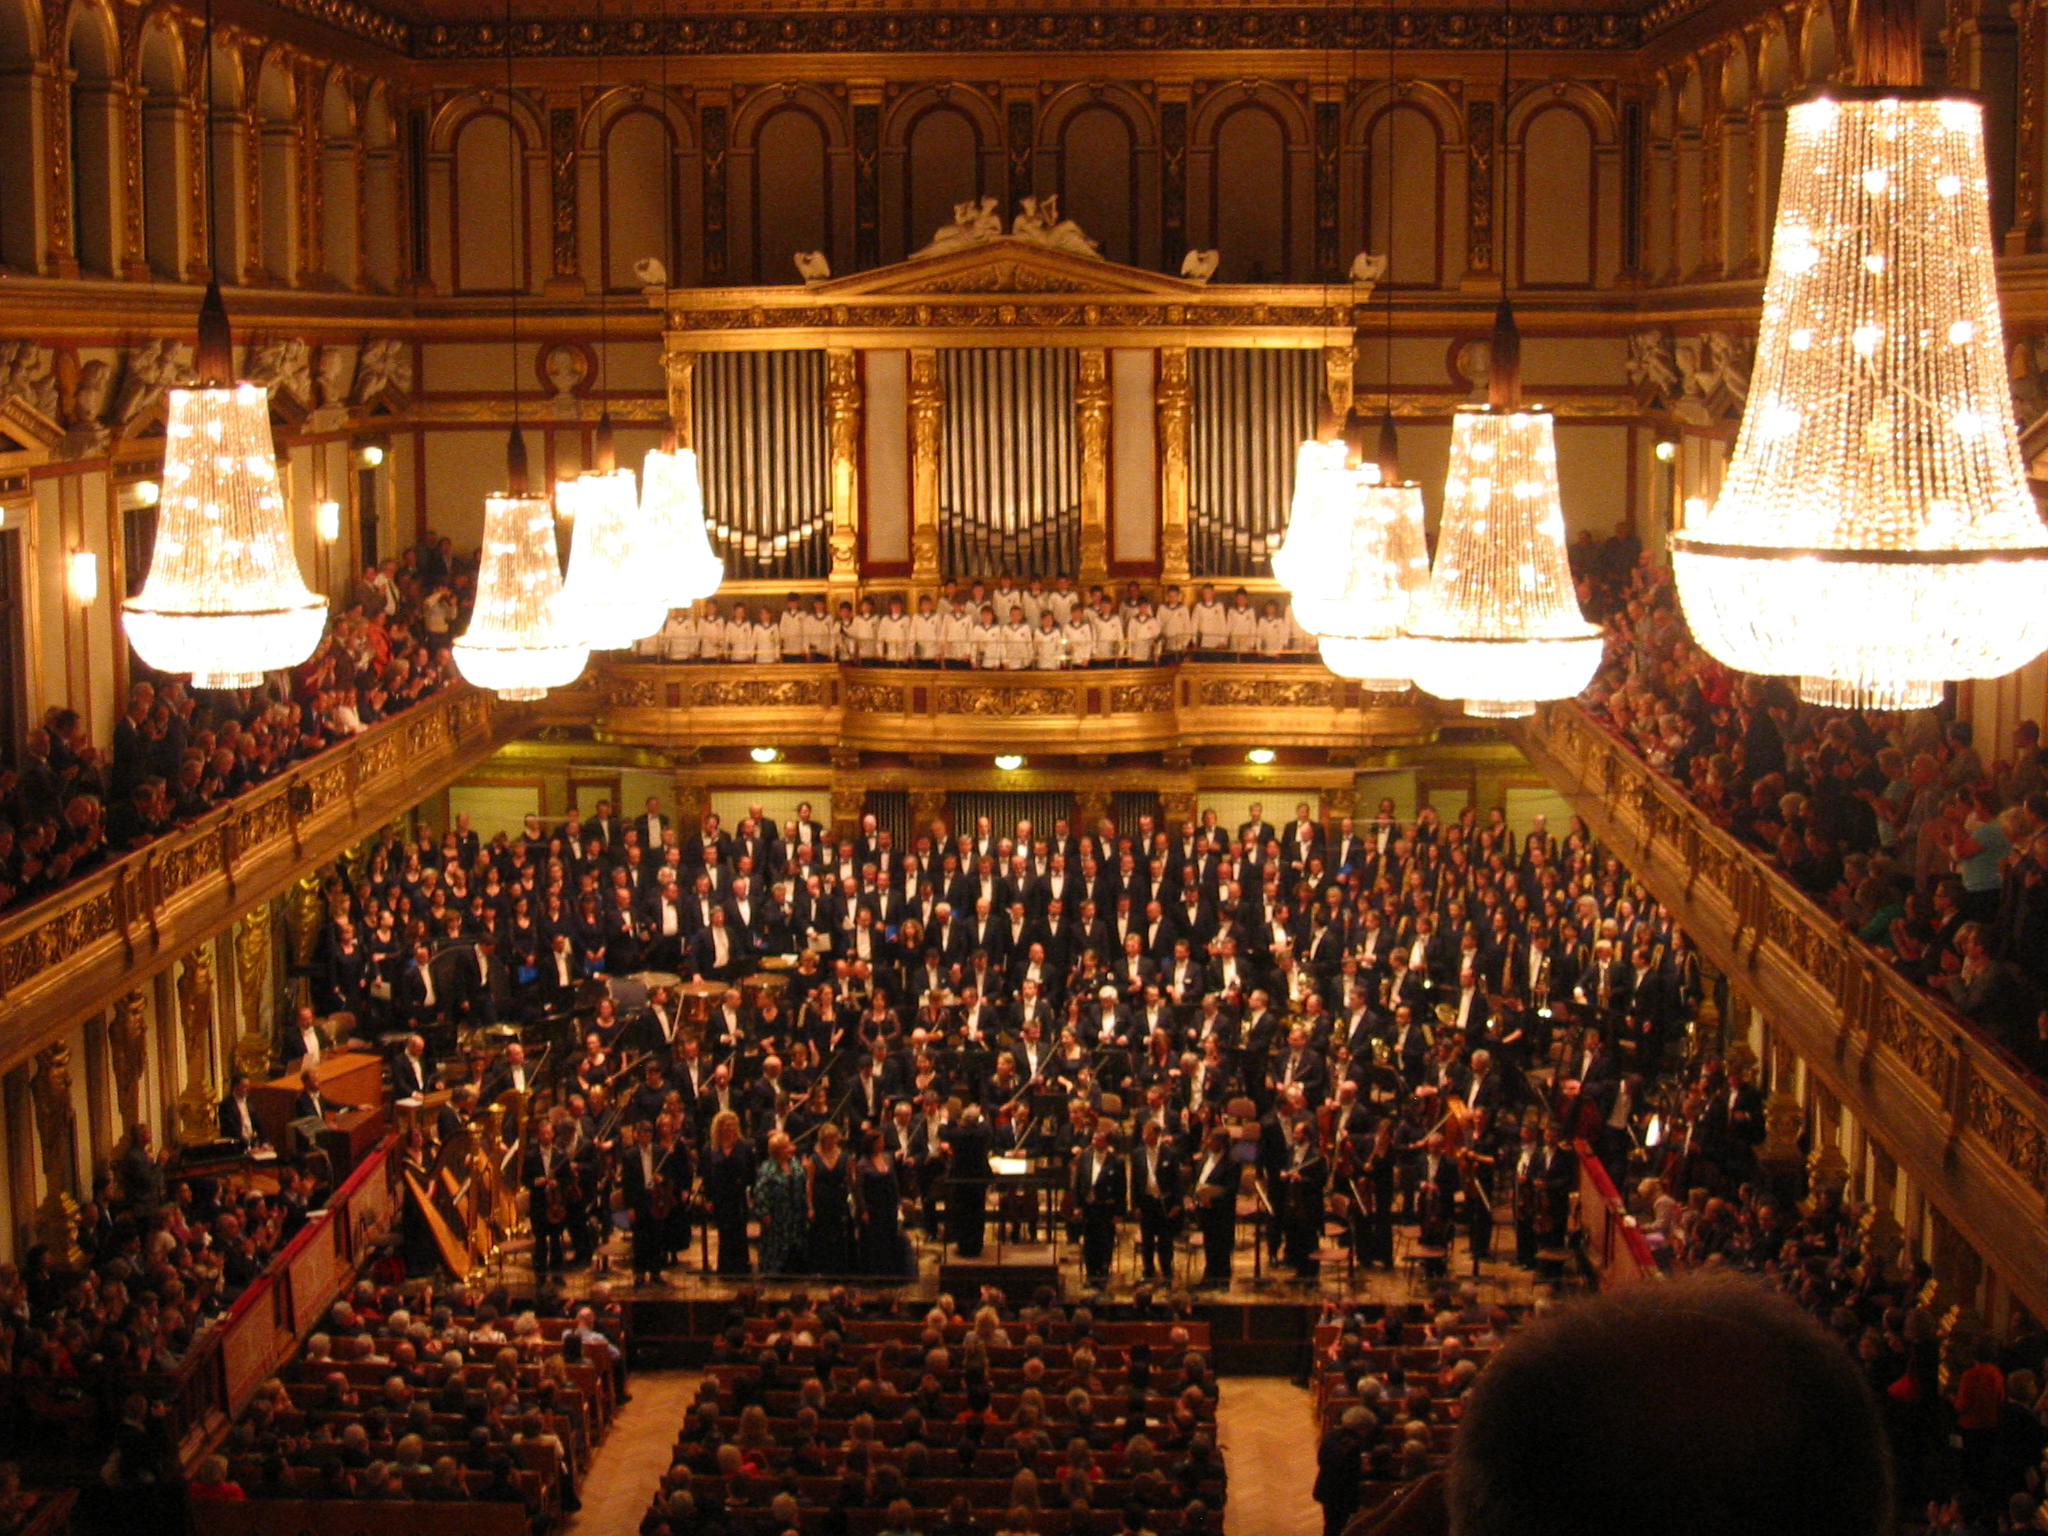 The Great Organ, in the Golden Hall, in Vienna's Musikverein, the concert hall of the Vienna Philharmonic Orchestra.